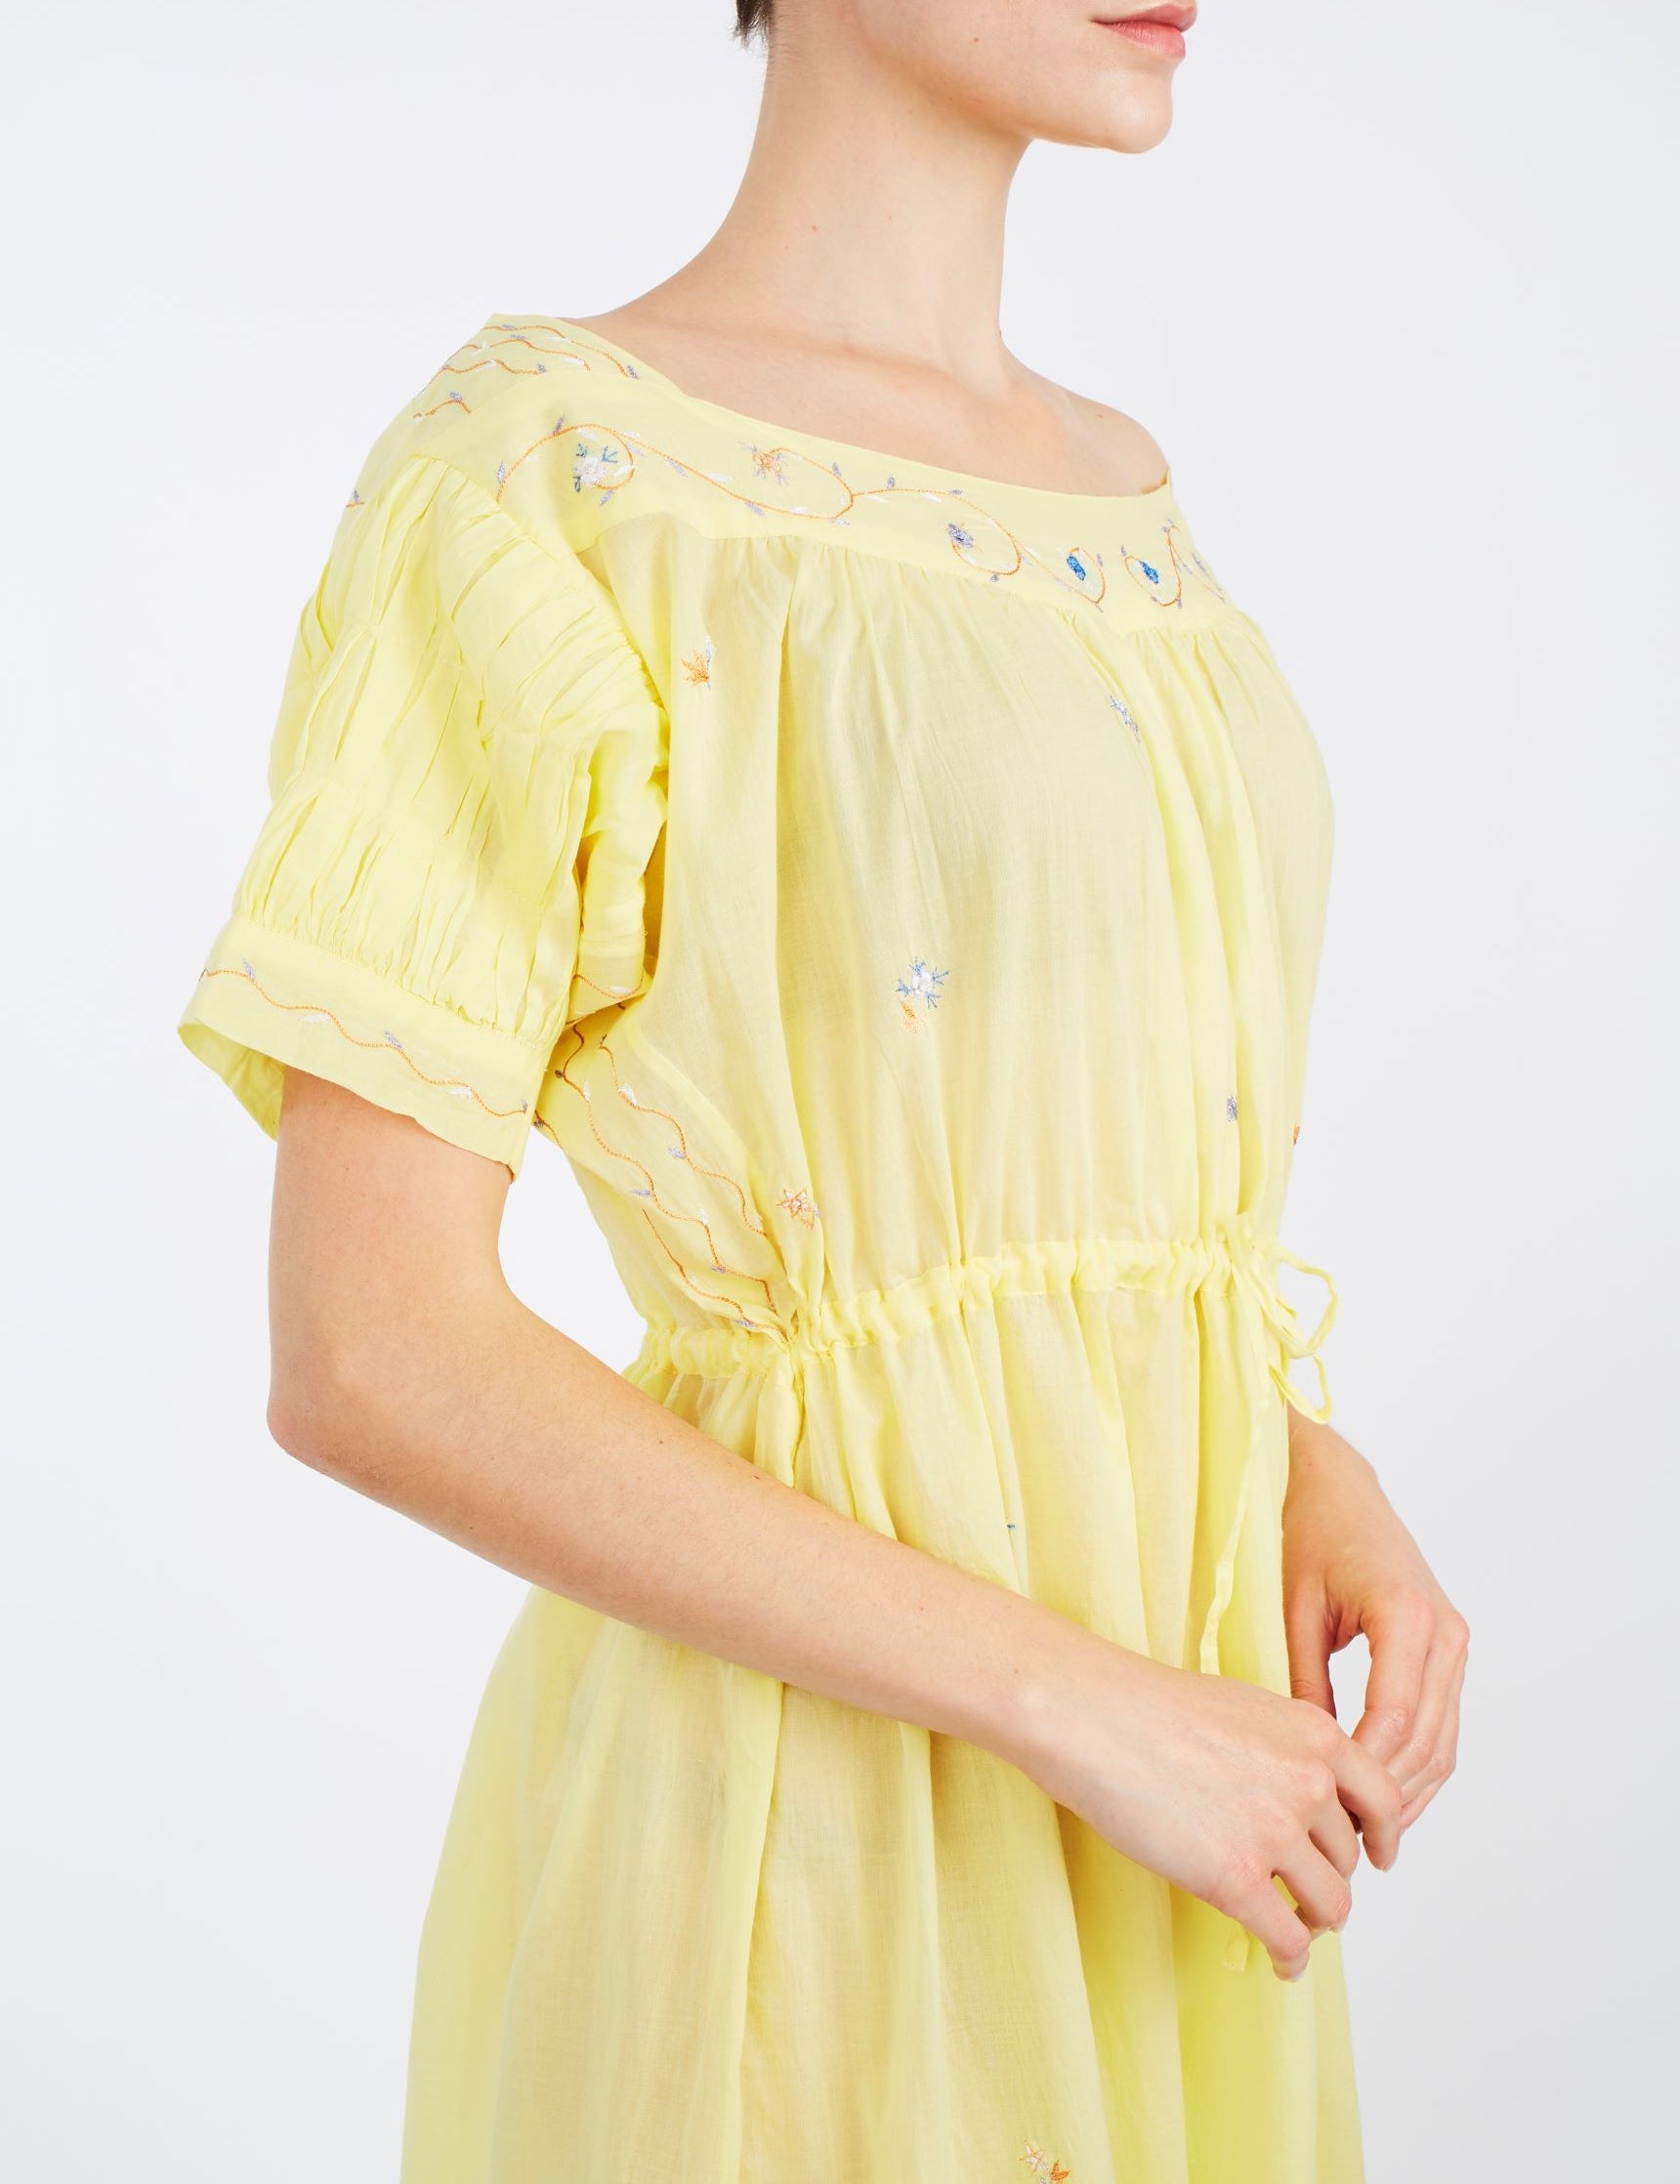 Collar detail of Tina Sweet Lemon Long Dress by Thierry Colson